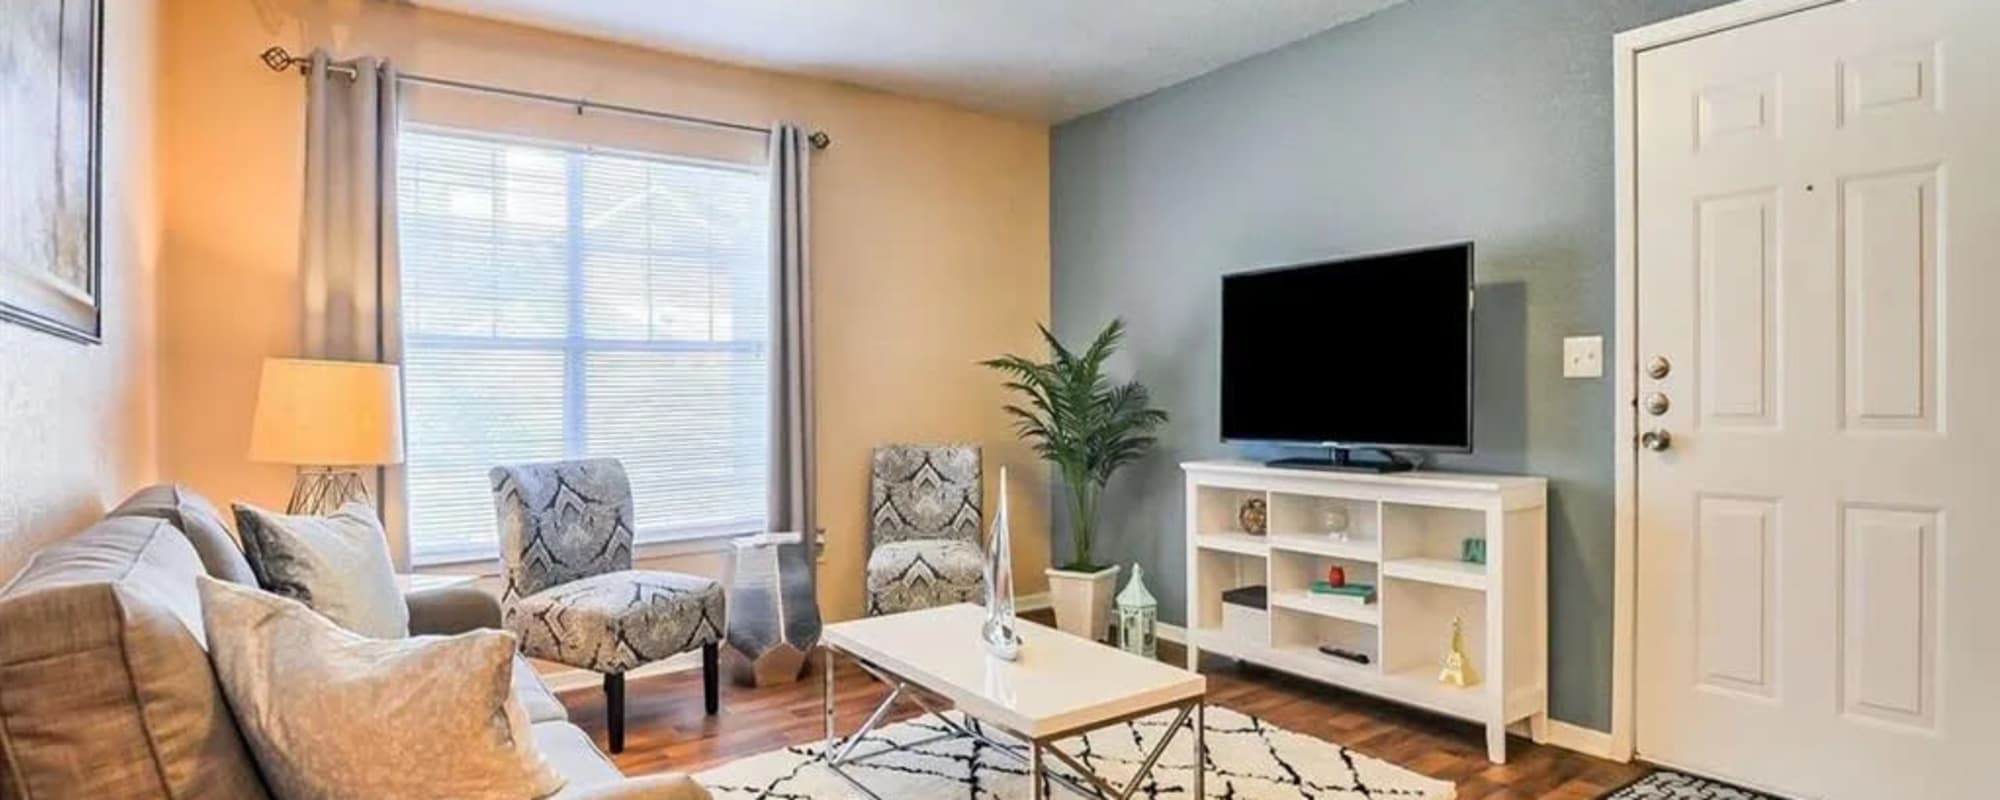 A furnished apartment living room with a painted accent wall at Reserve at Stillwater in Durham, North Carolina